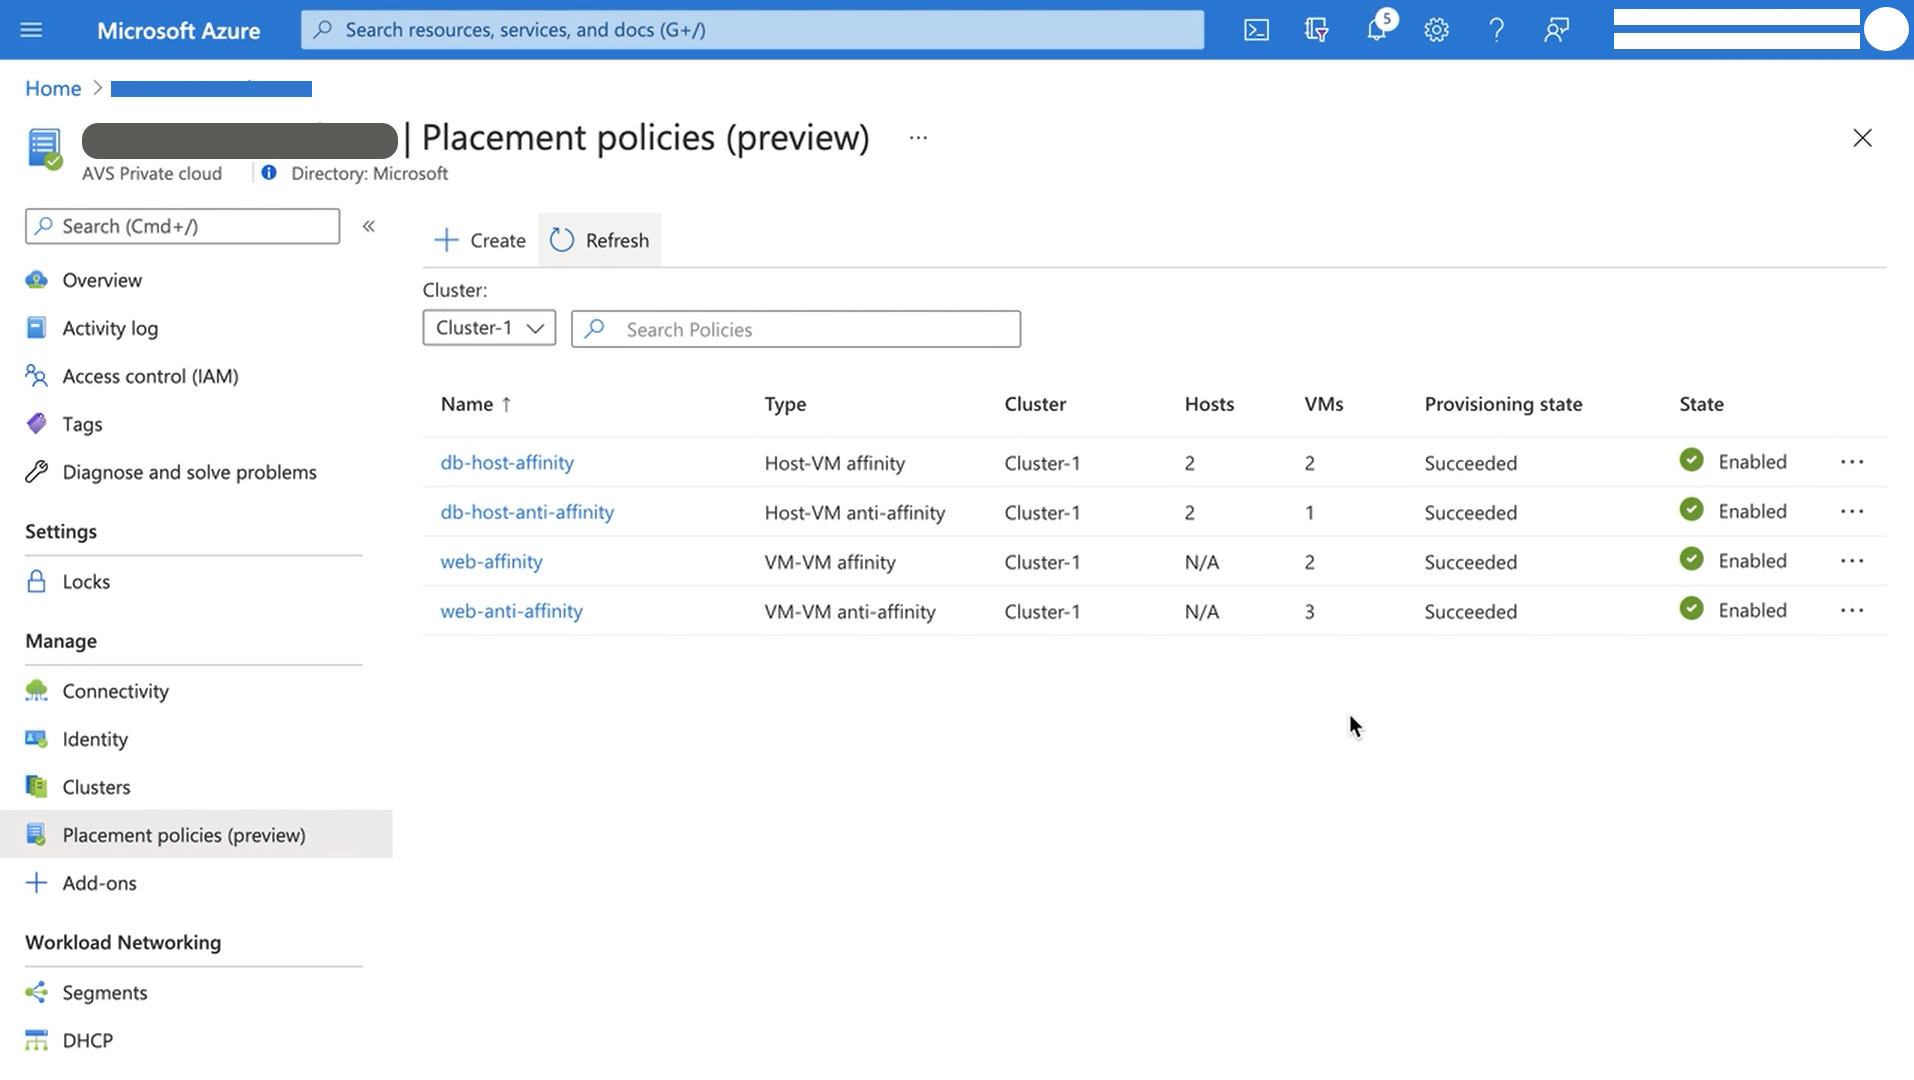 Azure VMware Solution Releases Placement Polices in Public Preview